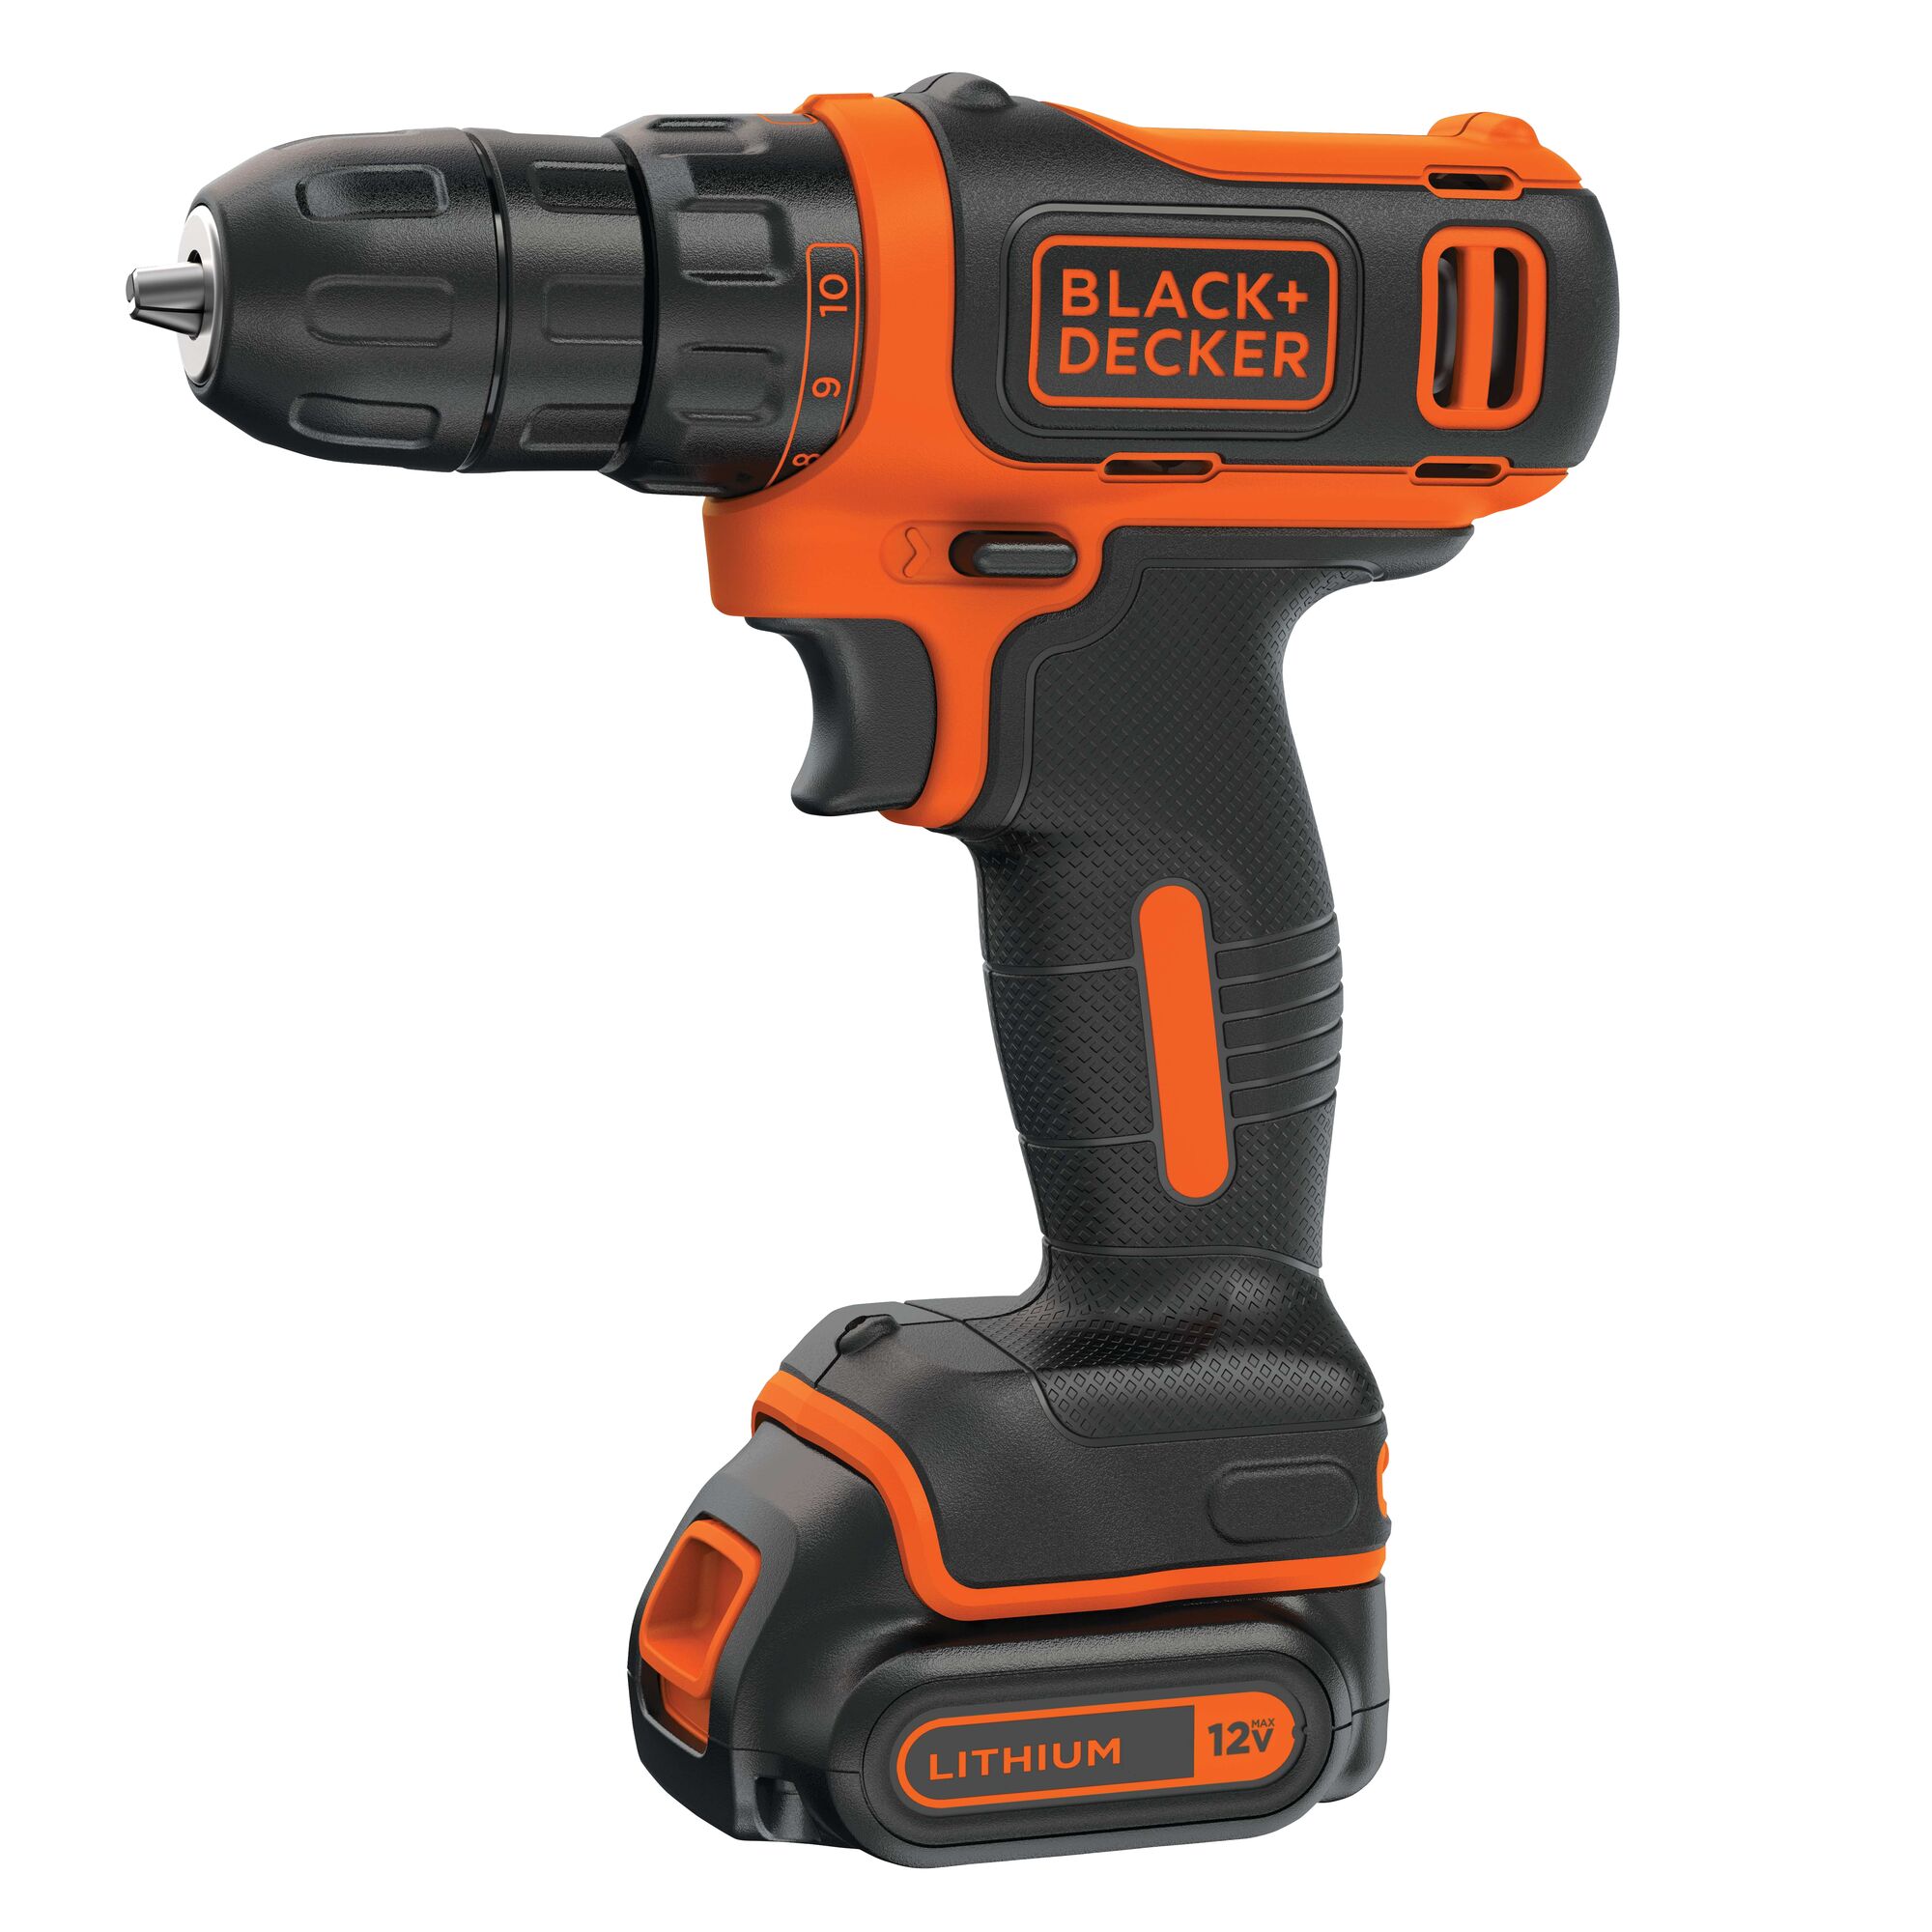 Profile of 12 volt MAX Lithium Ion Drill Driver and 59 Piece Project Kit.